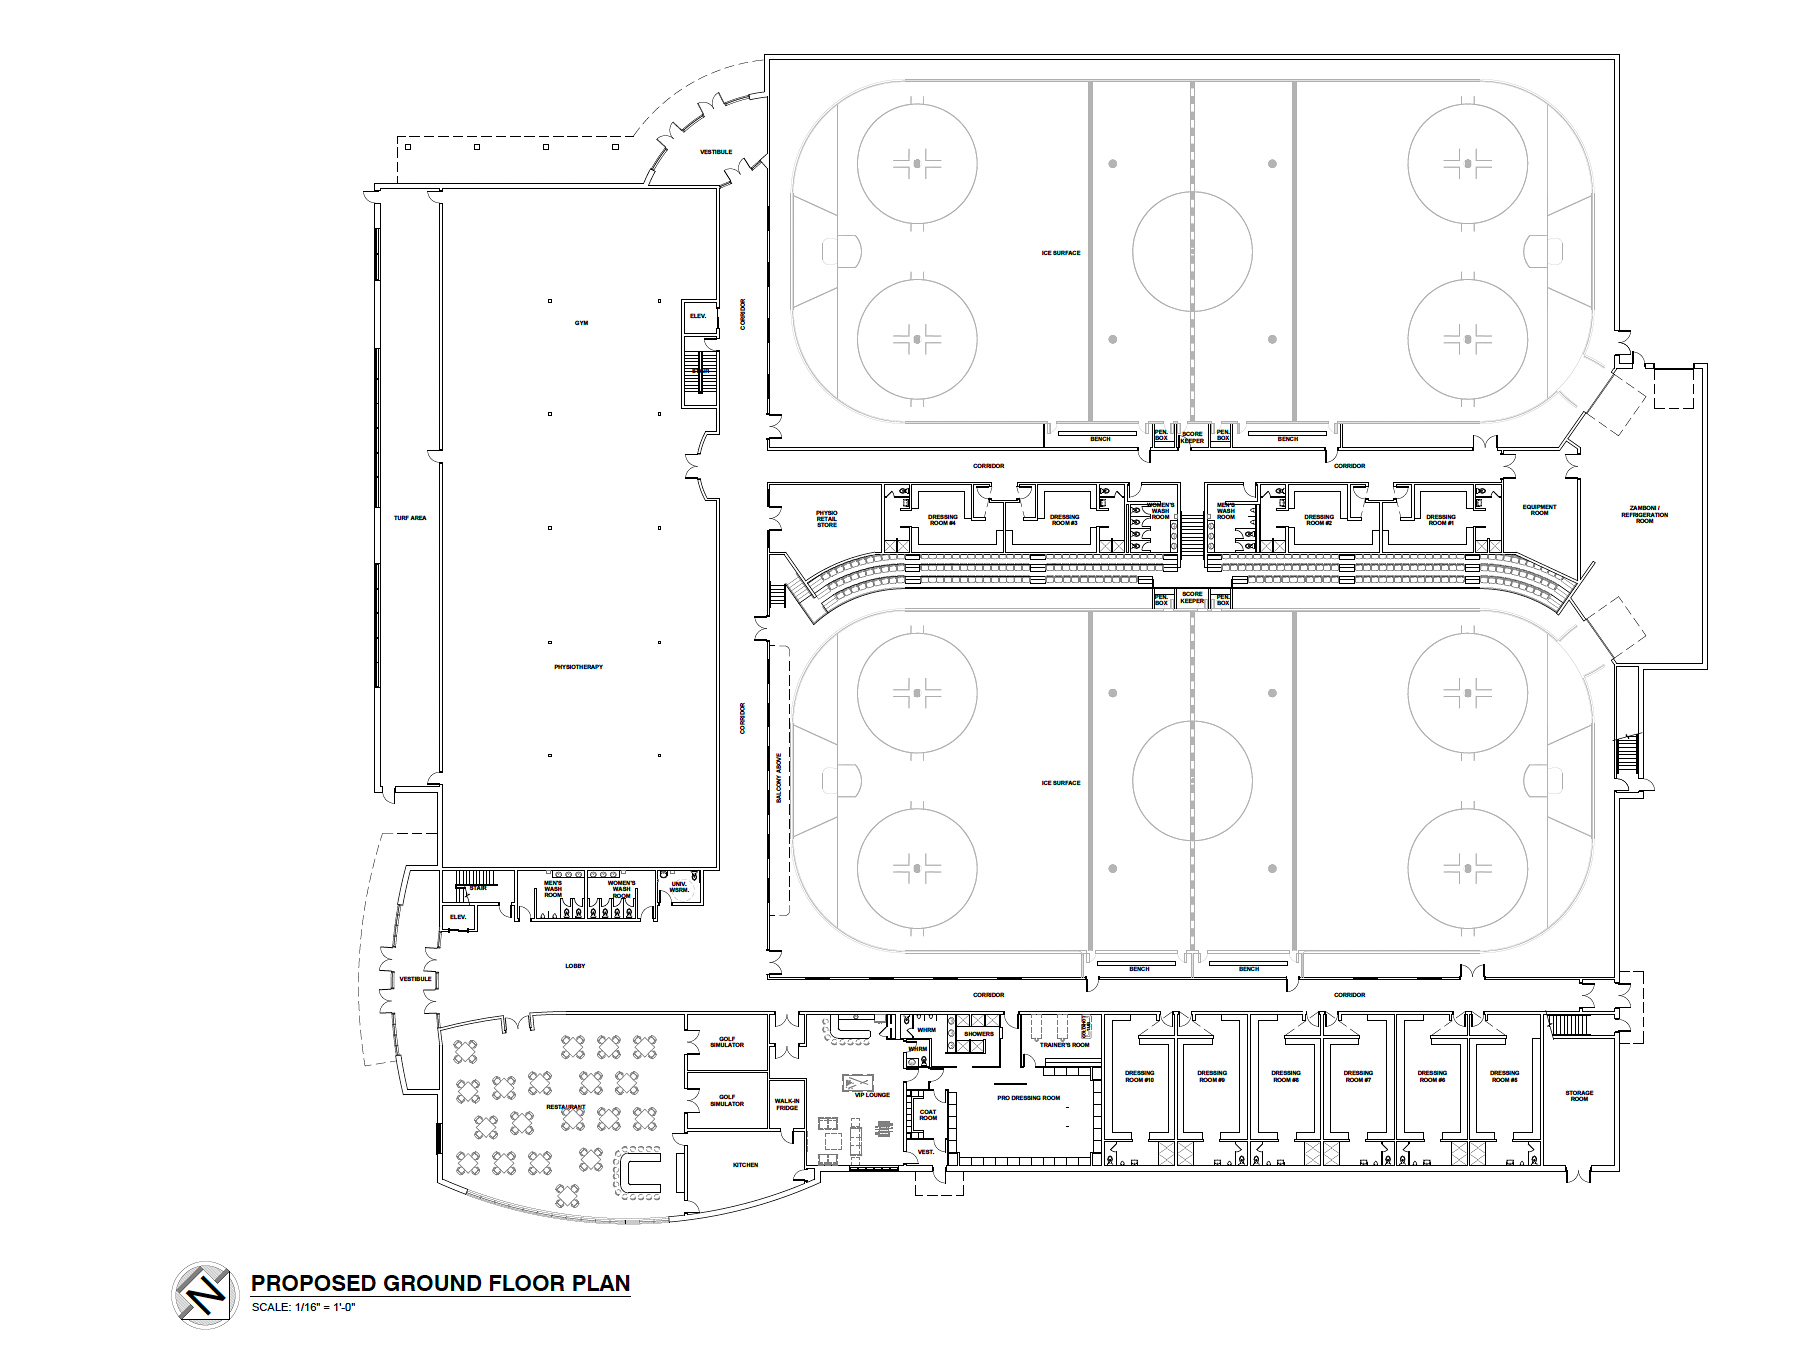 ground floor plans of epic sports centre